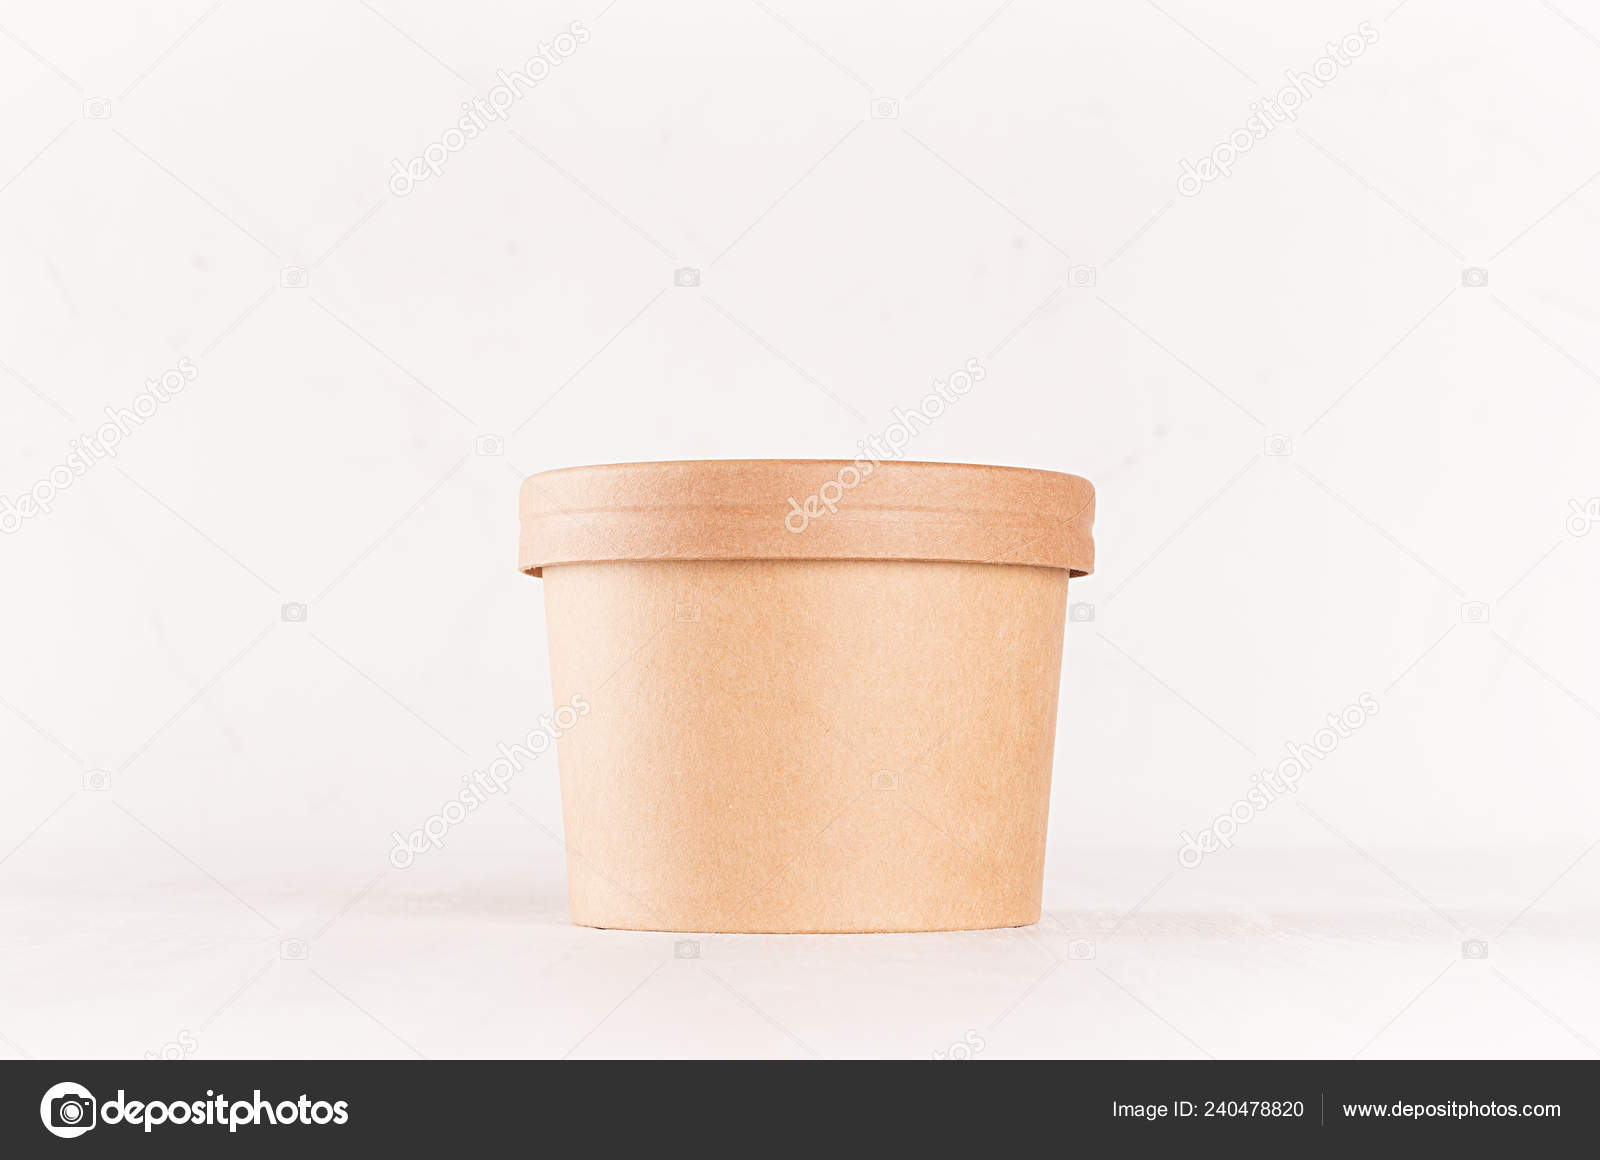 Download Blank Disposable Brown Paper Box Takeaway Food Soup Salad Ice Stock Photo Image By C Alinayudina 240478820